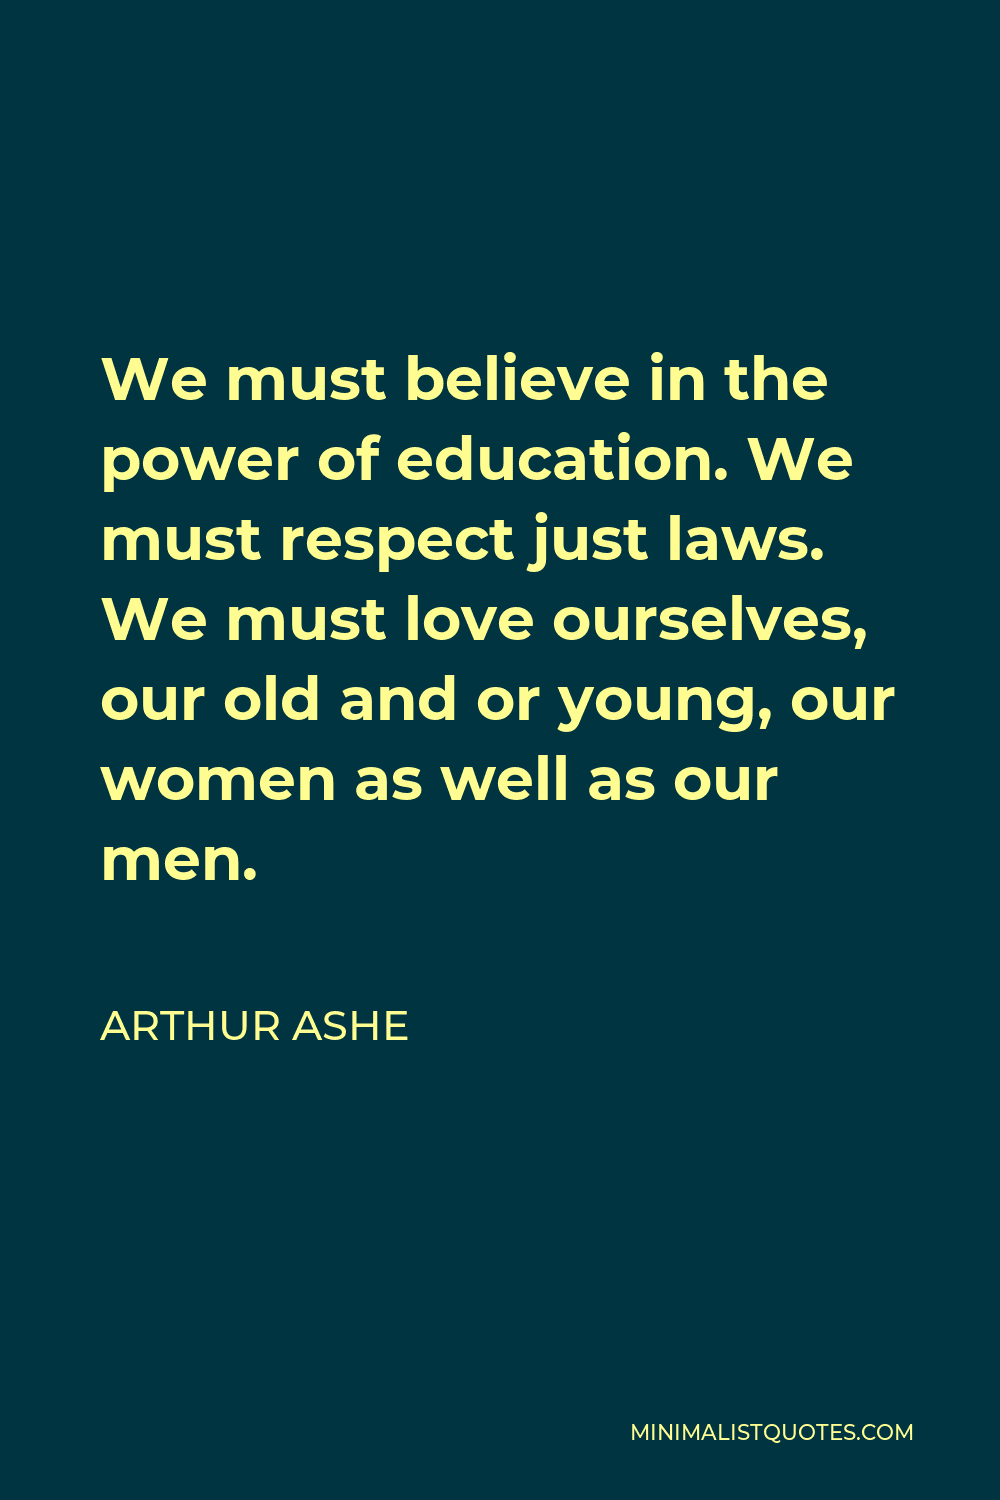 Arthur Ashe Quote - We must believe in the power of education. We must respect just laws. We must love ourselves, our old and or young, our women as well as our men.